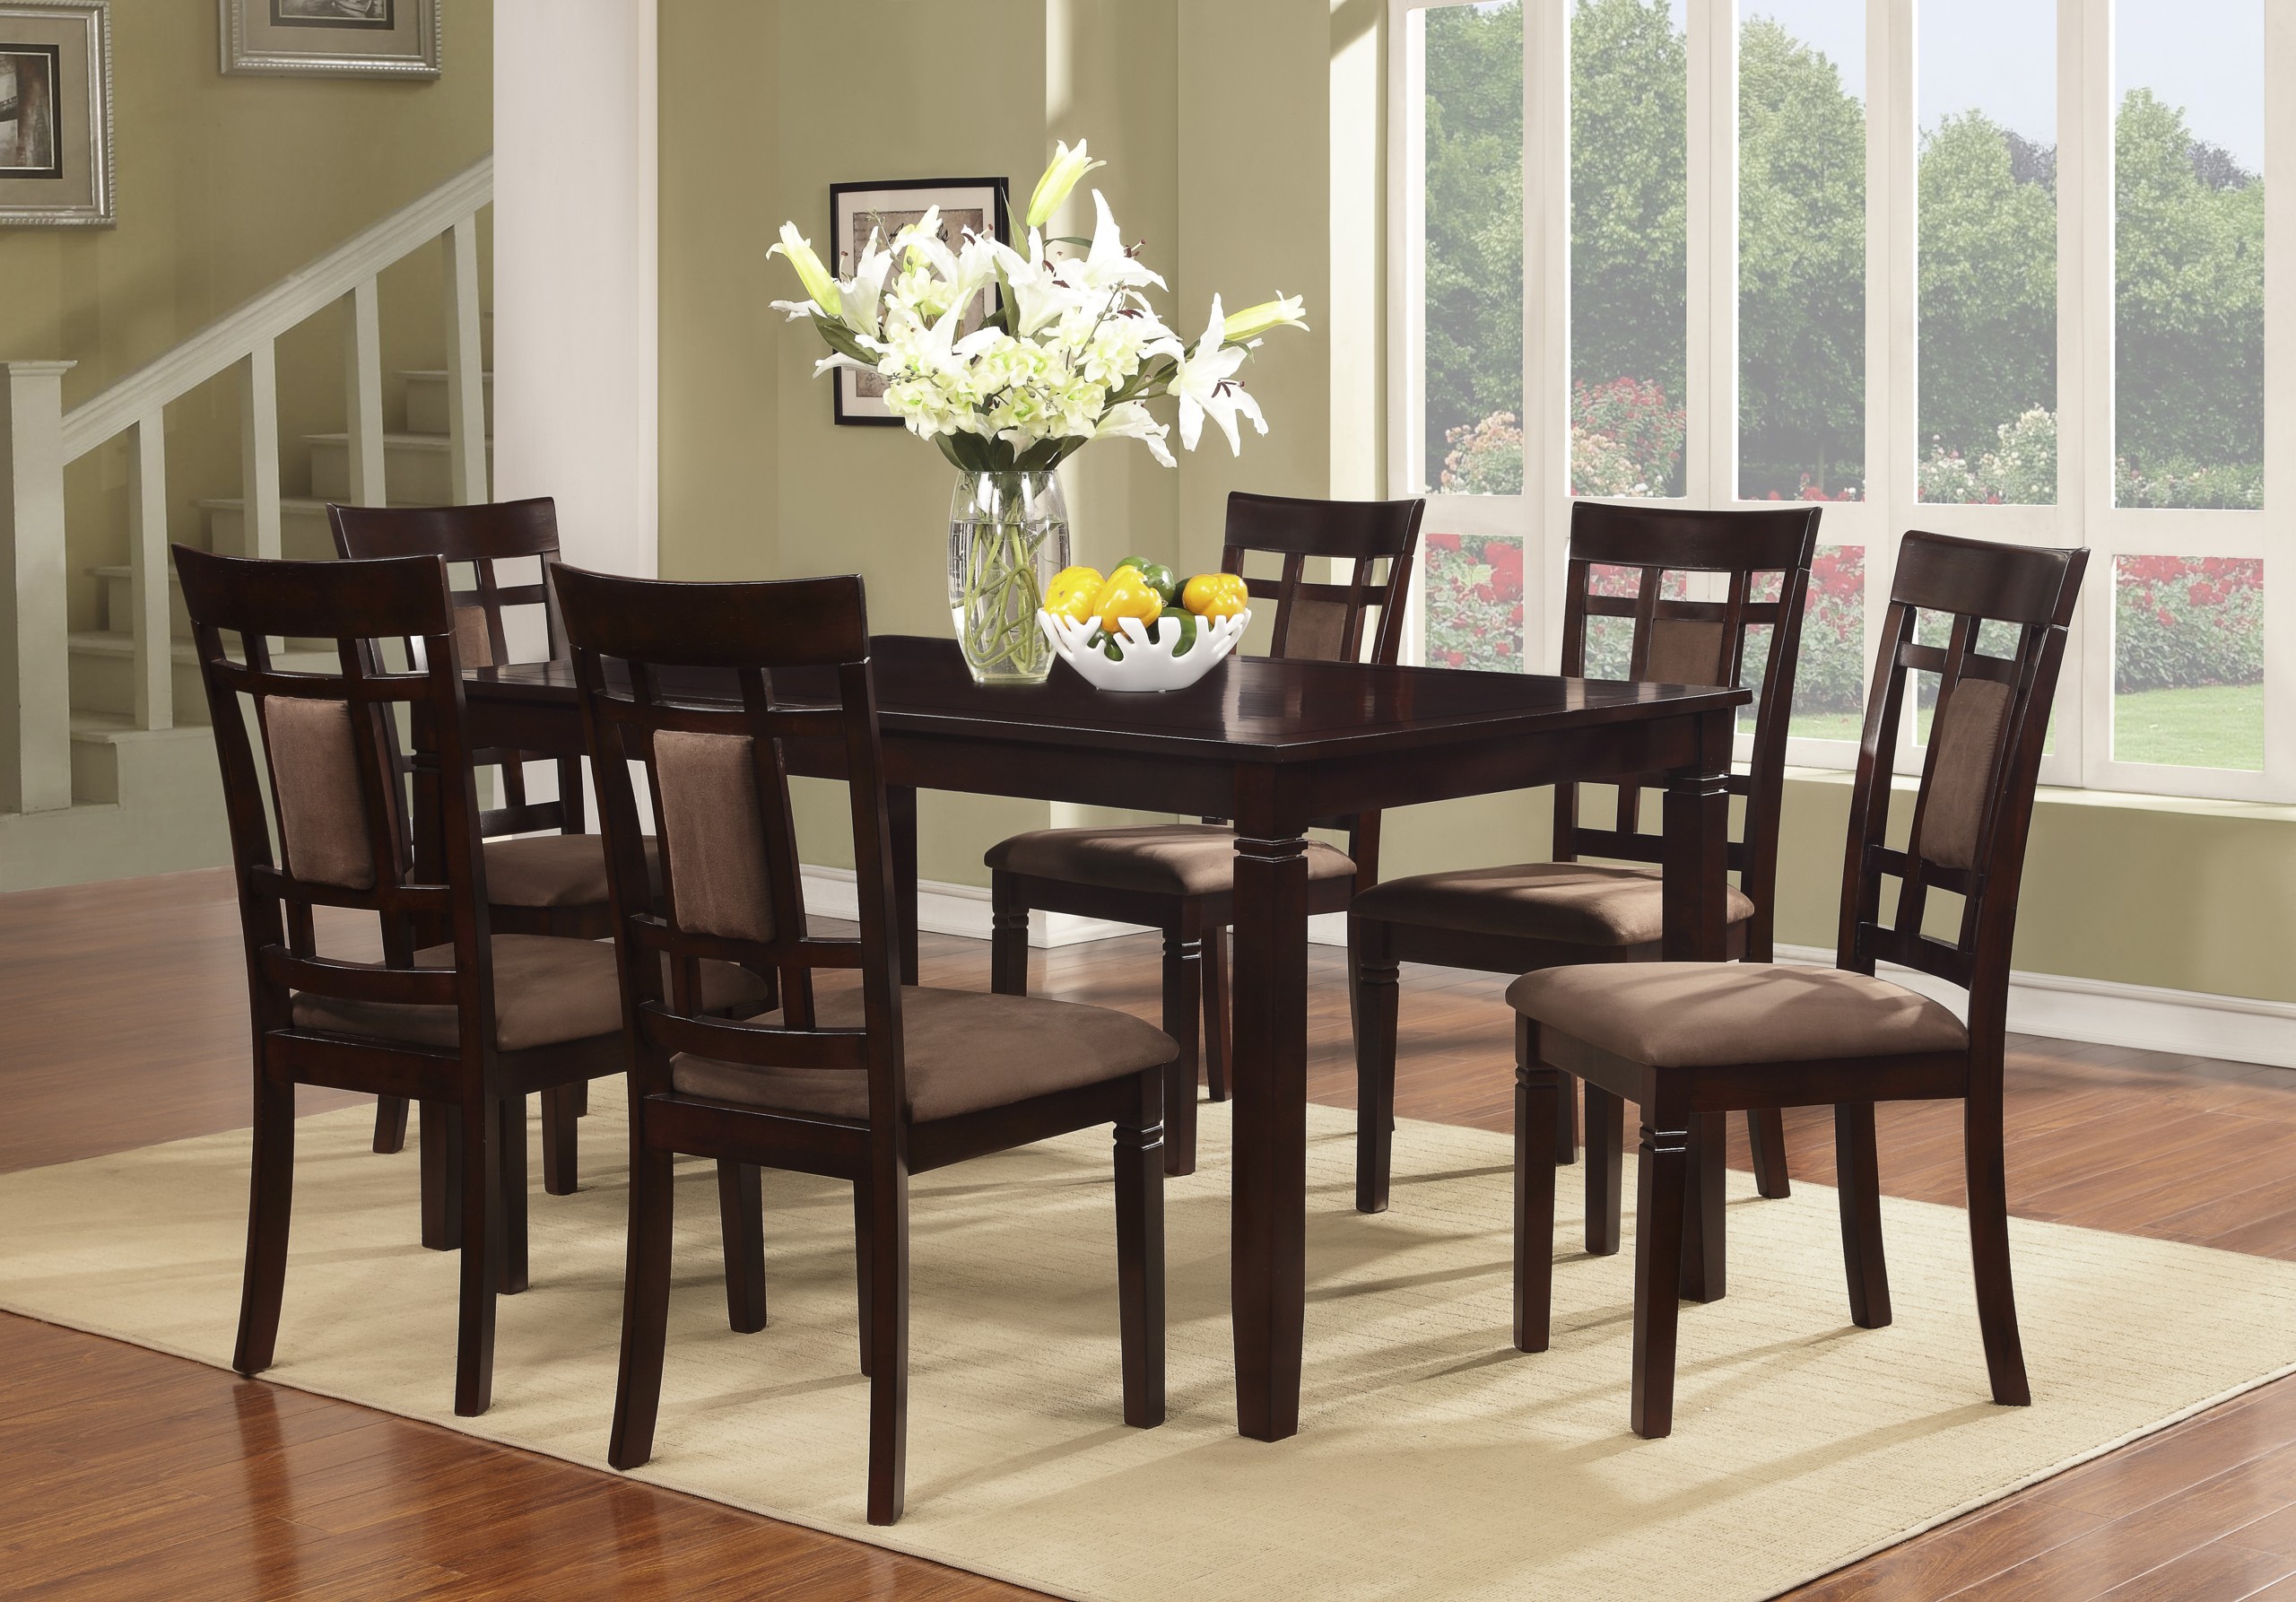 7 Pc Brand New Cherry Finish Solid Wood Dining Table Set, Table and 6 Chairs